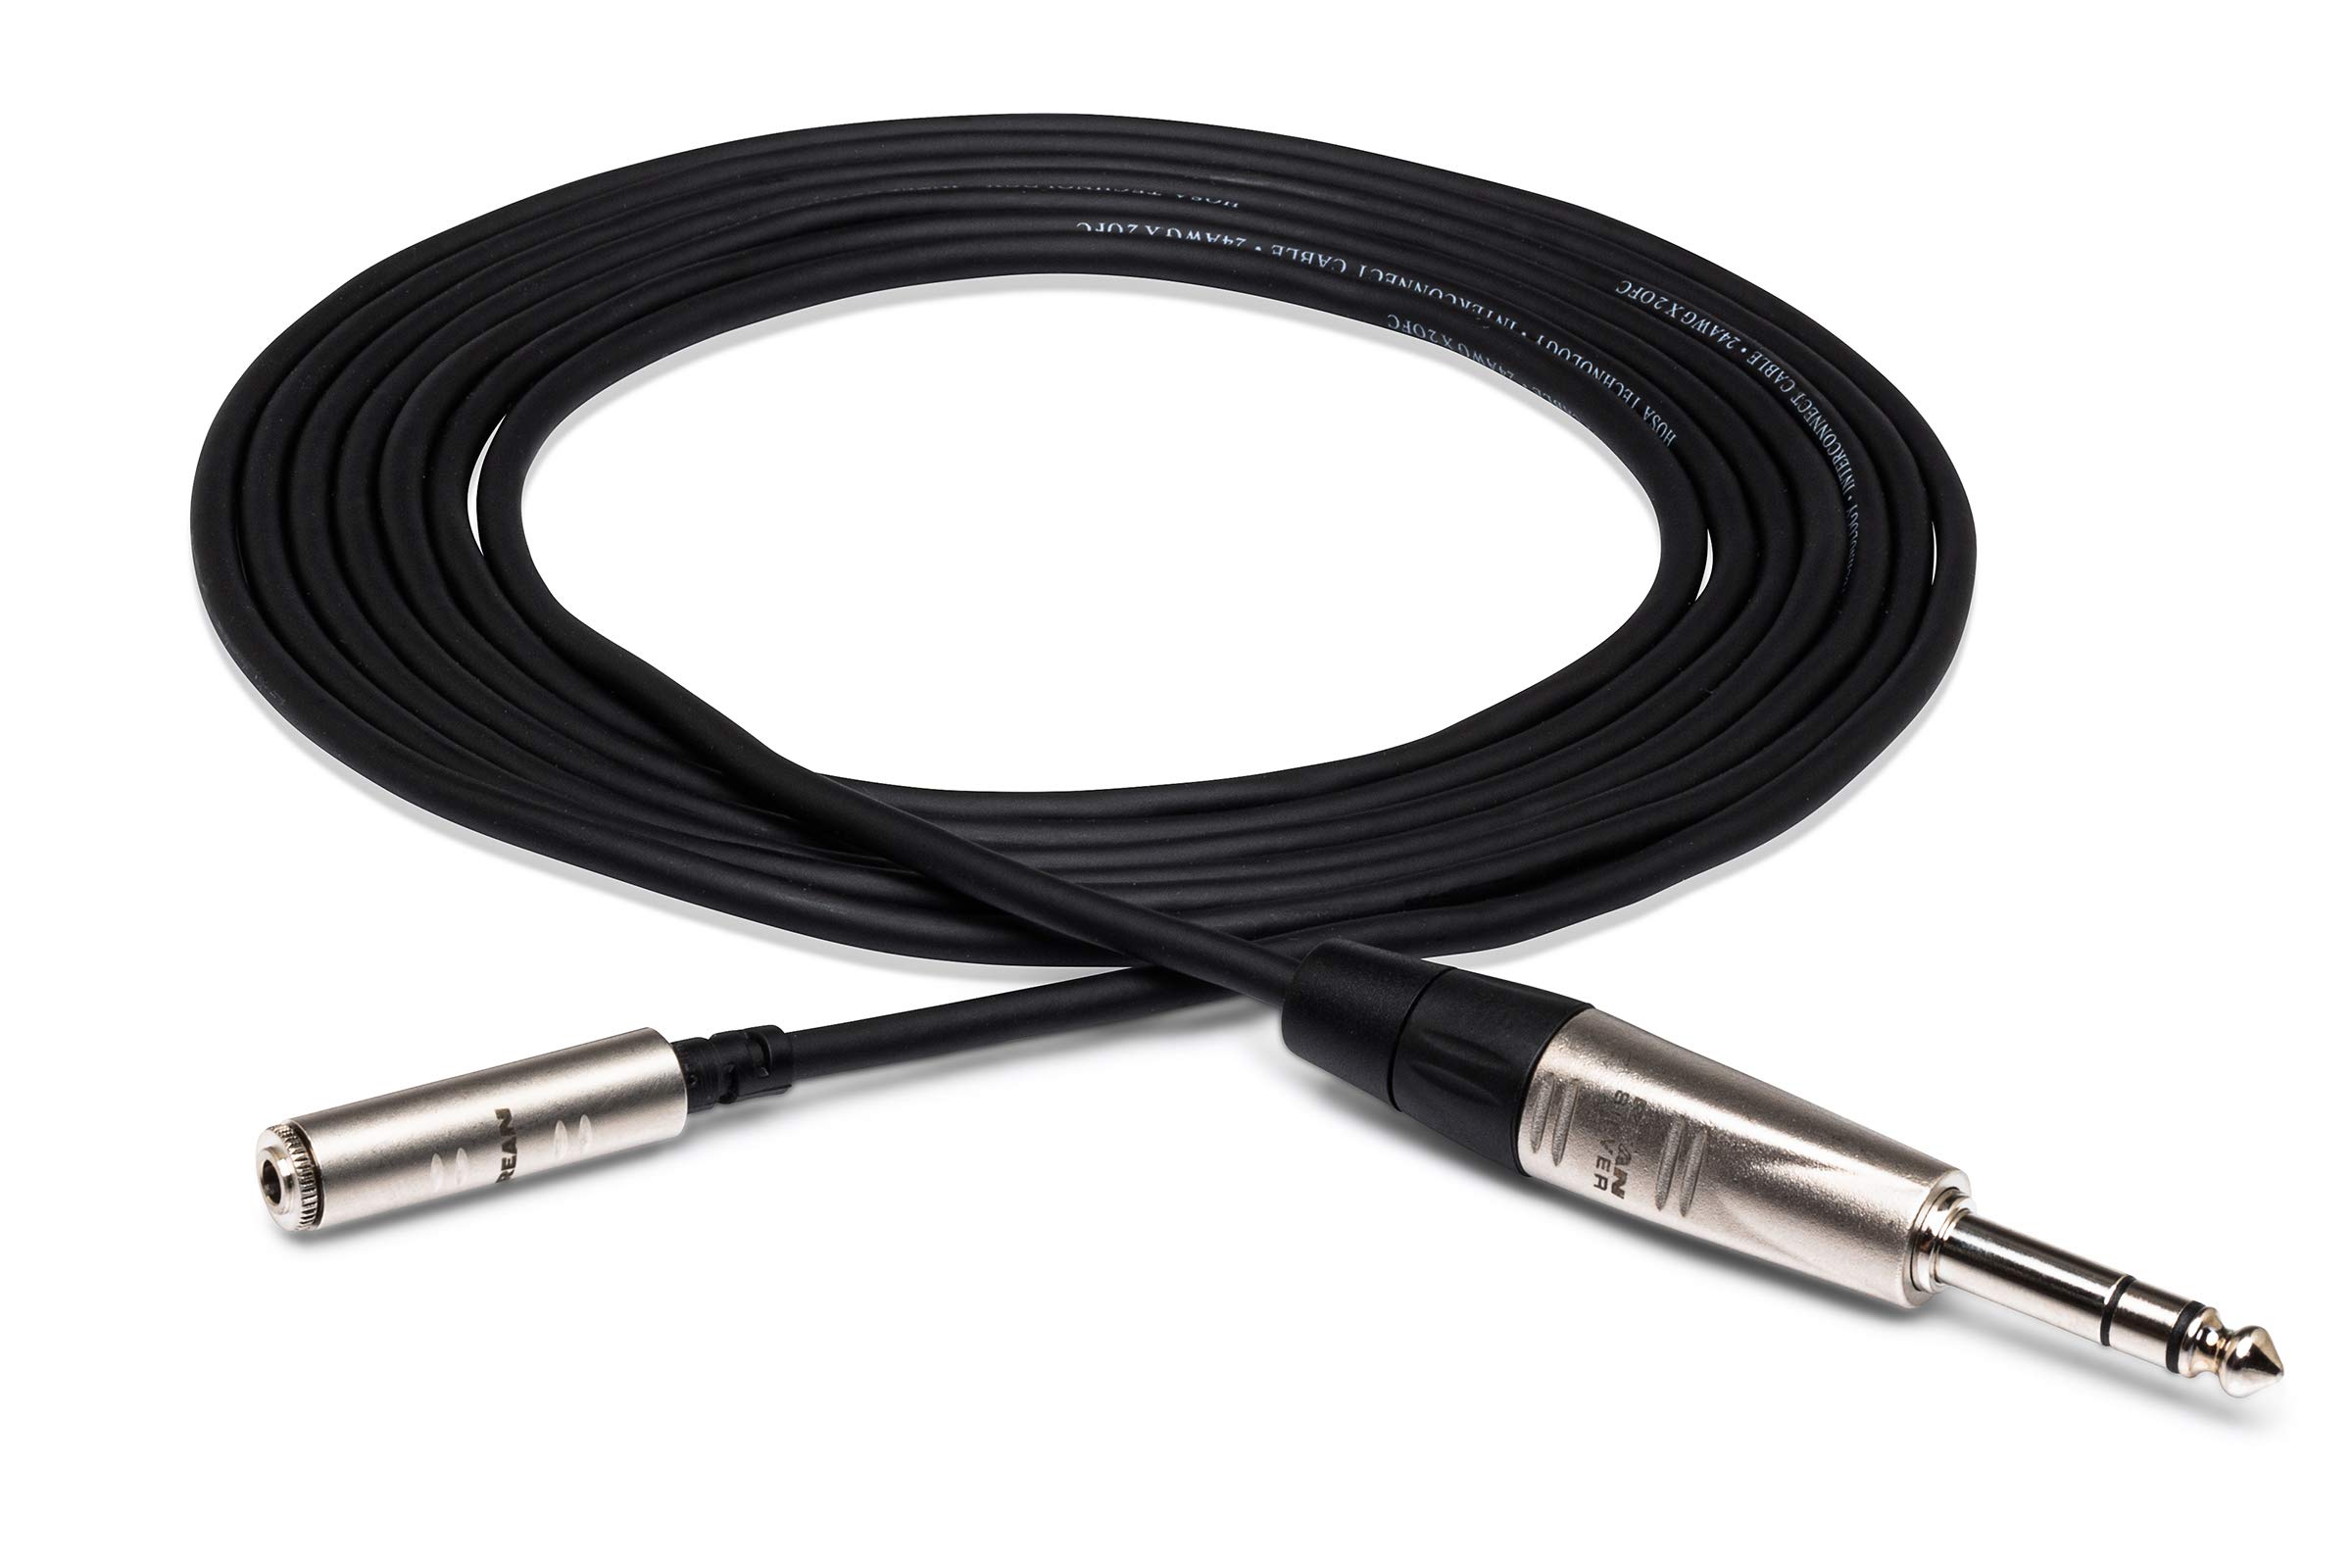 Hosa HXMS-005 REAN 3.5 mm TRS to 1/4" TRS Pro Headphone Adaptor Cable, 5 Feet